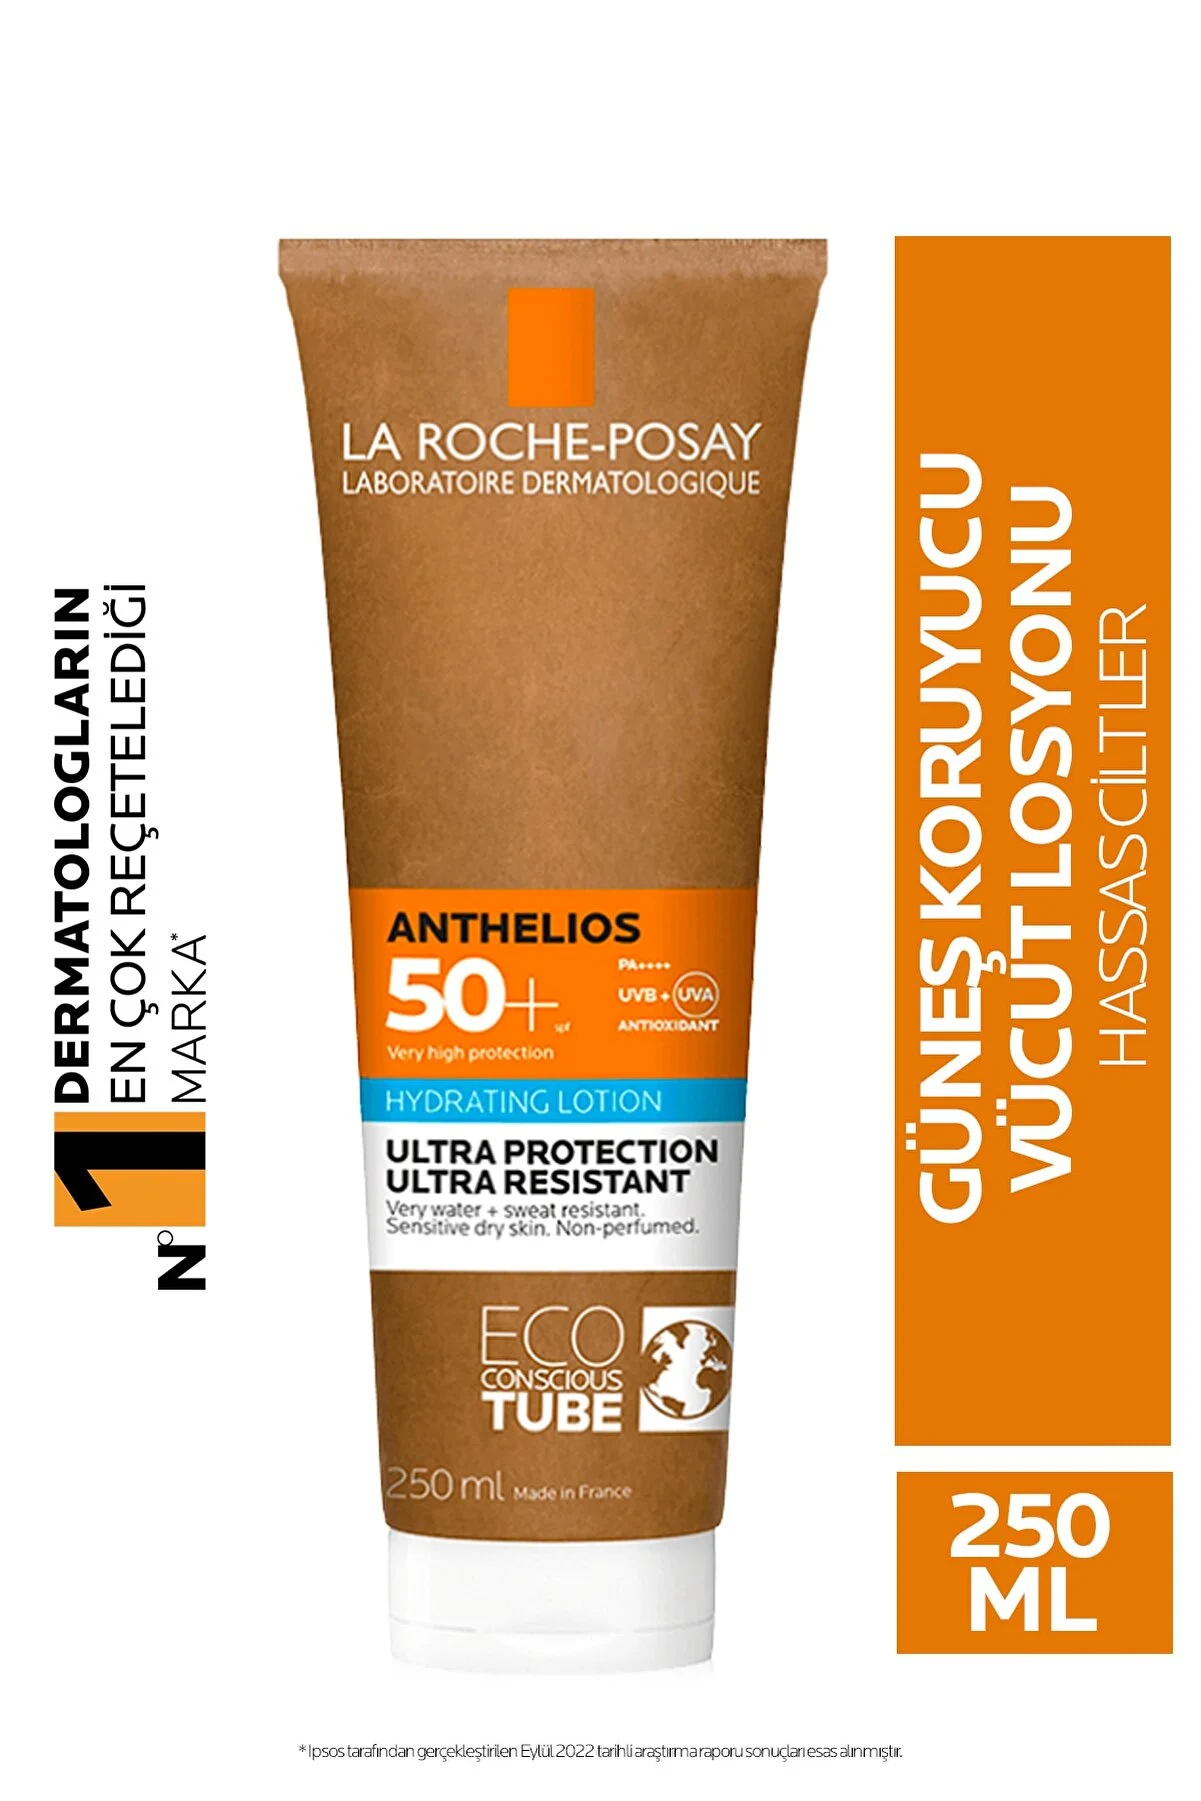 La Roche Posay Anthelios Hydrating Lotion SPF50+ 250 ml